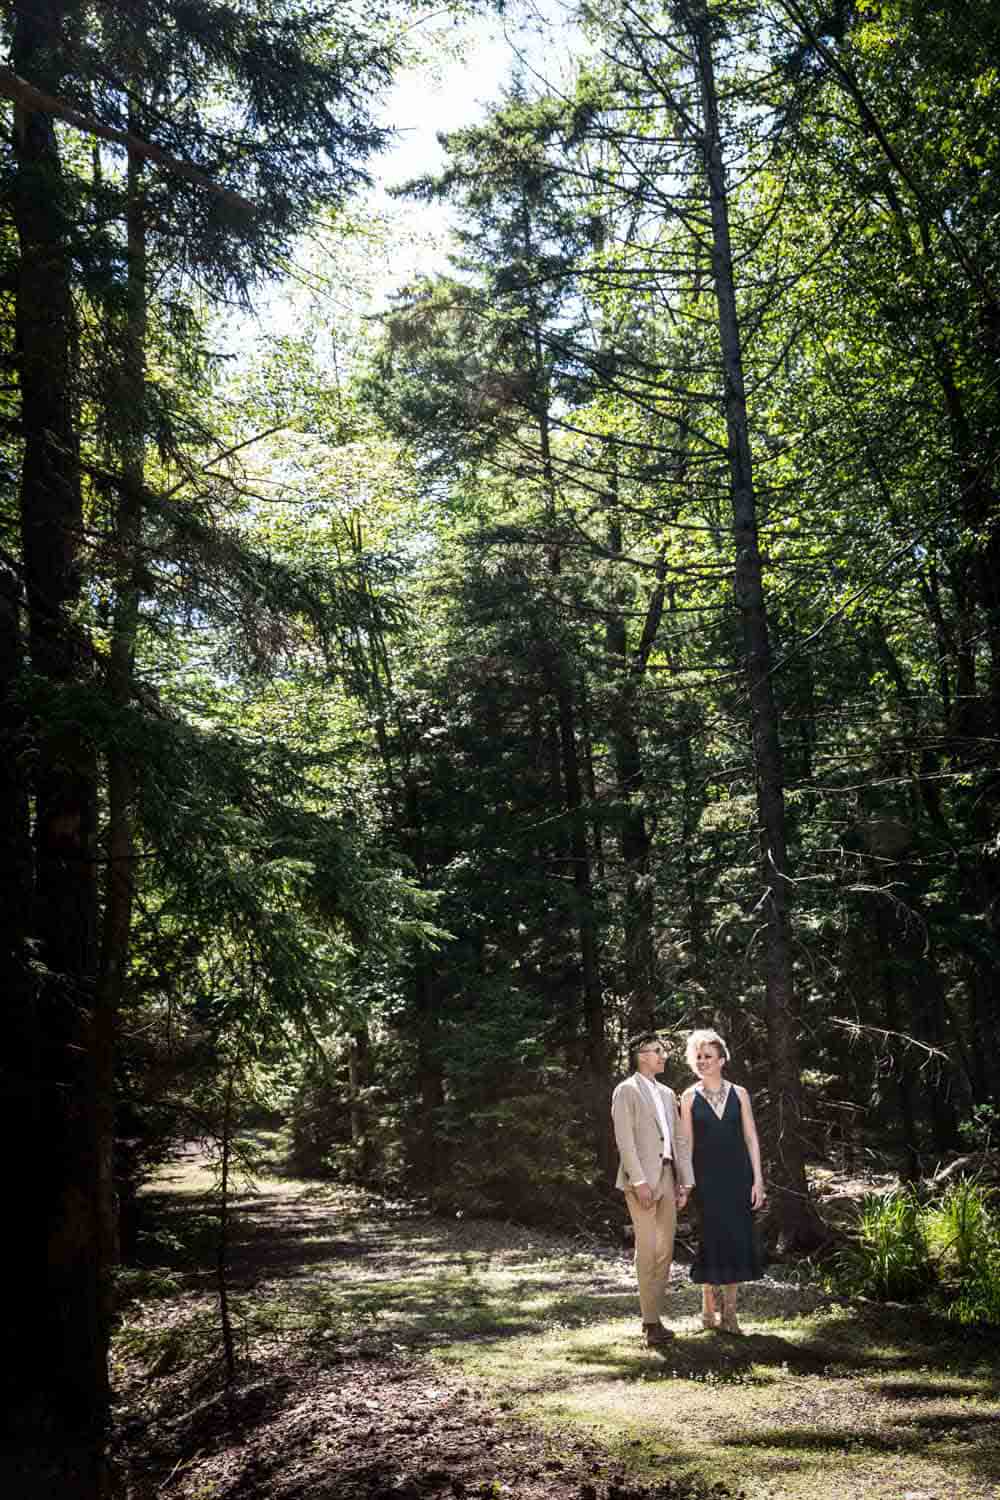 Mother and son walking in the woods during a family reunion portrait